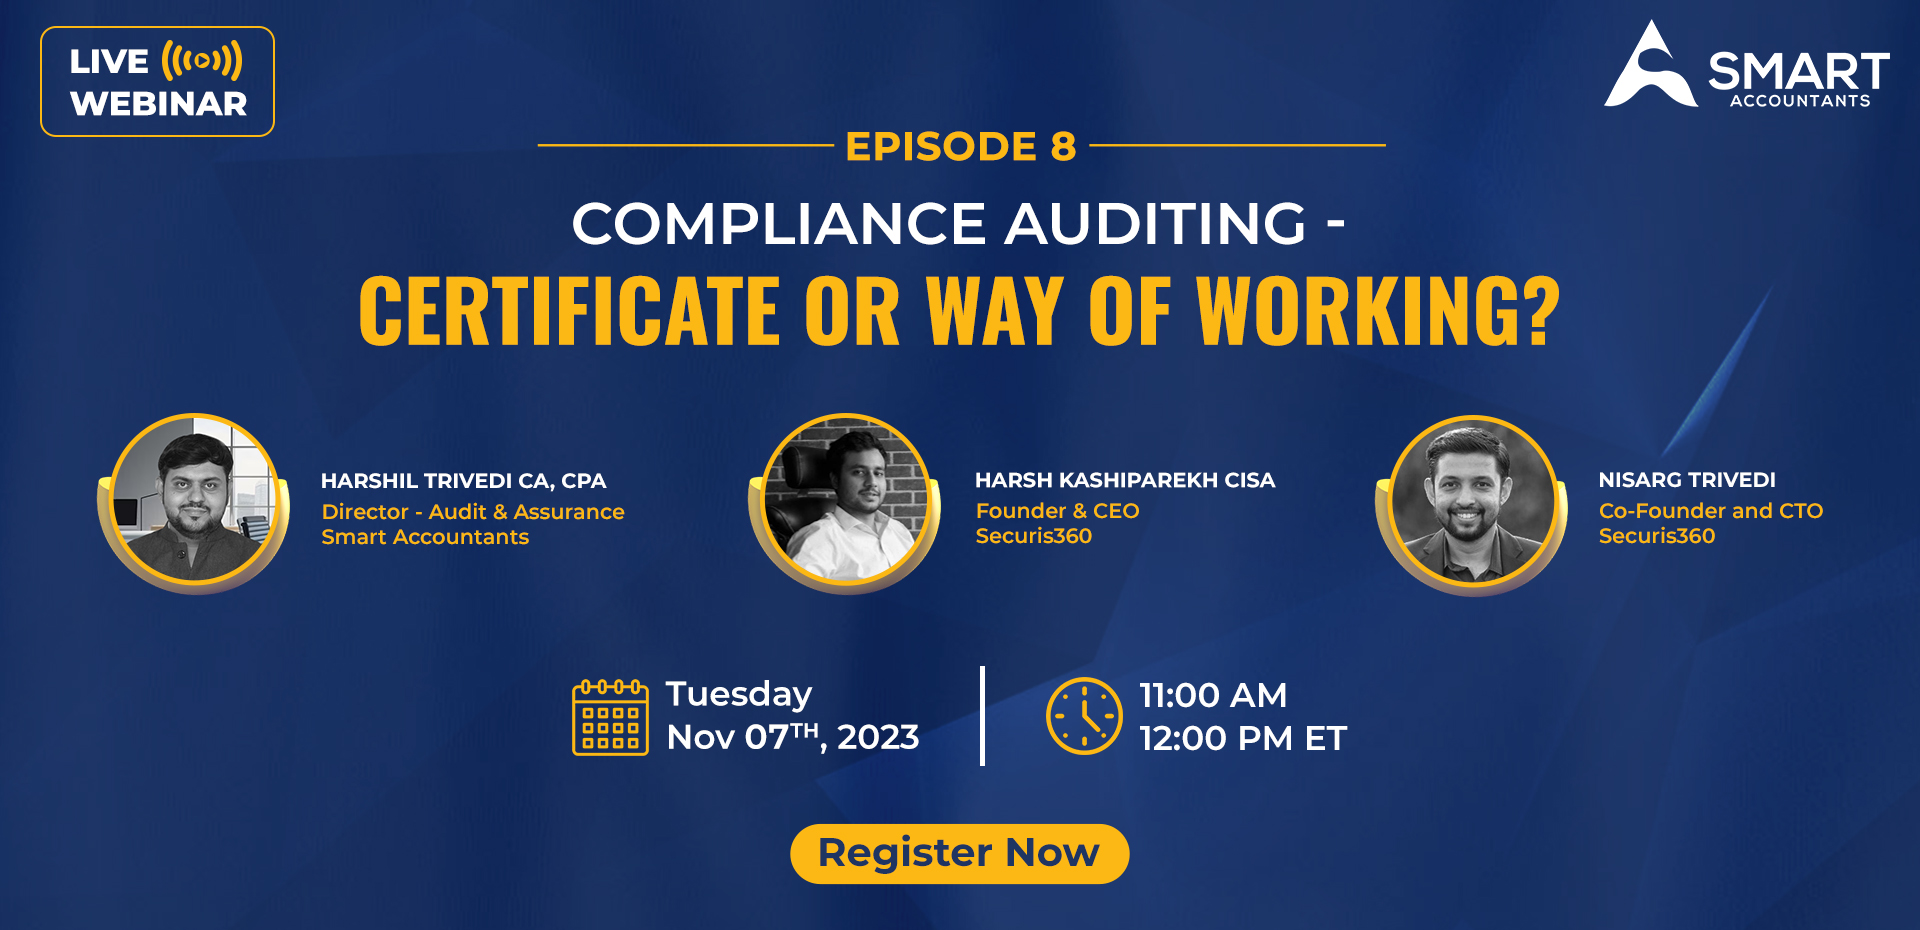 Episode: 8 Compliance Auditing - Certificate or Way of Working? - Smart Accountants